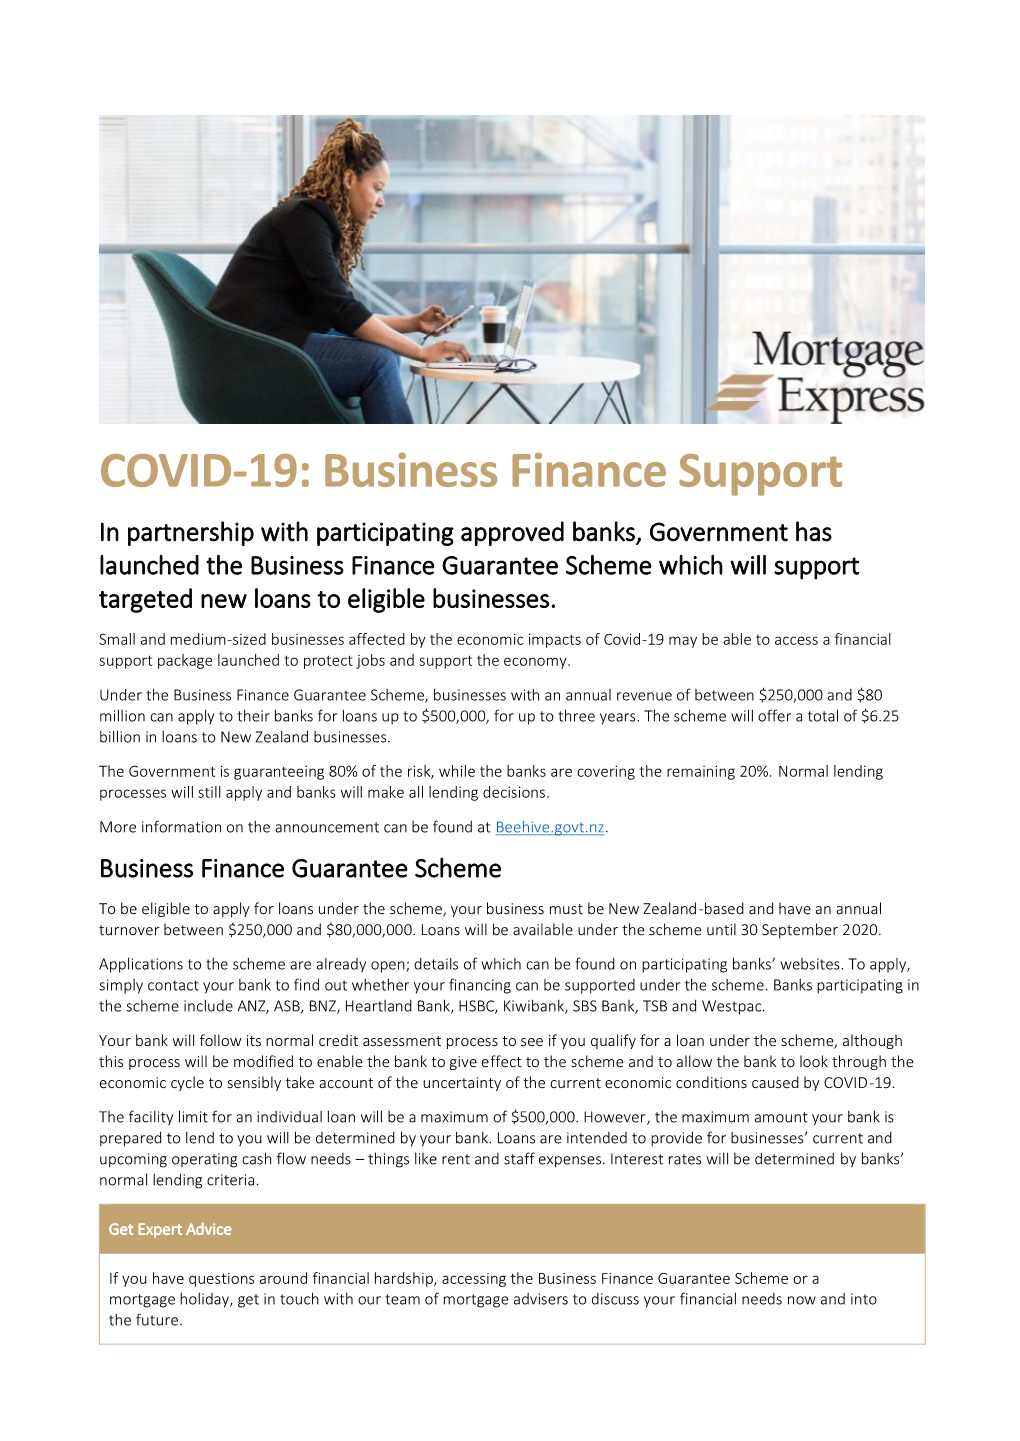 COVID-19: Business Finance Support